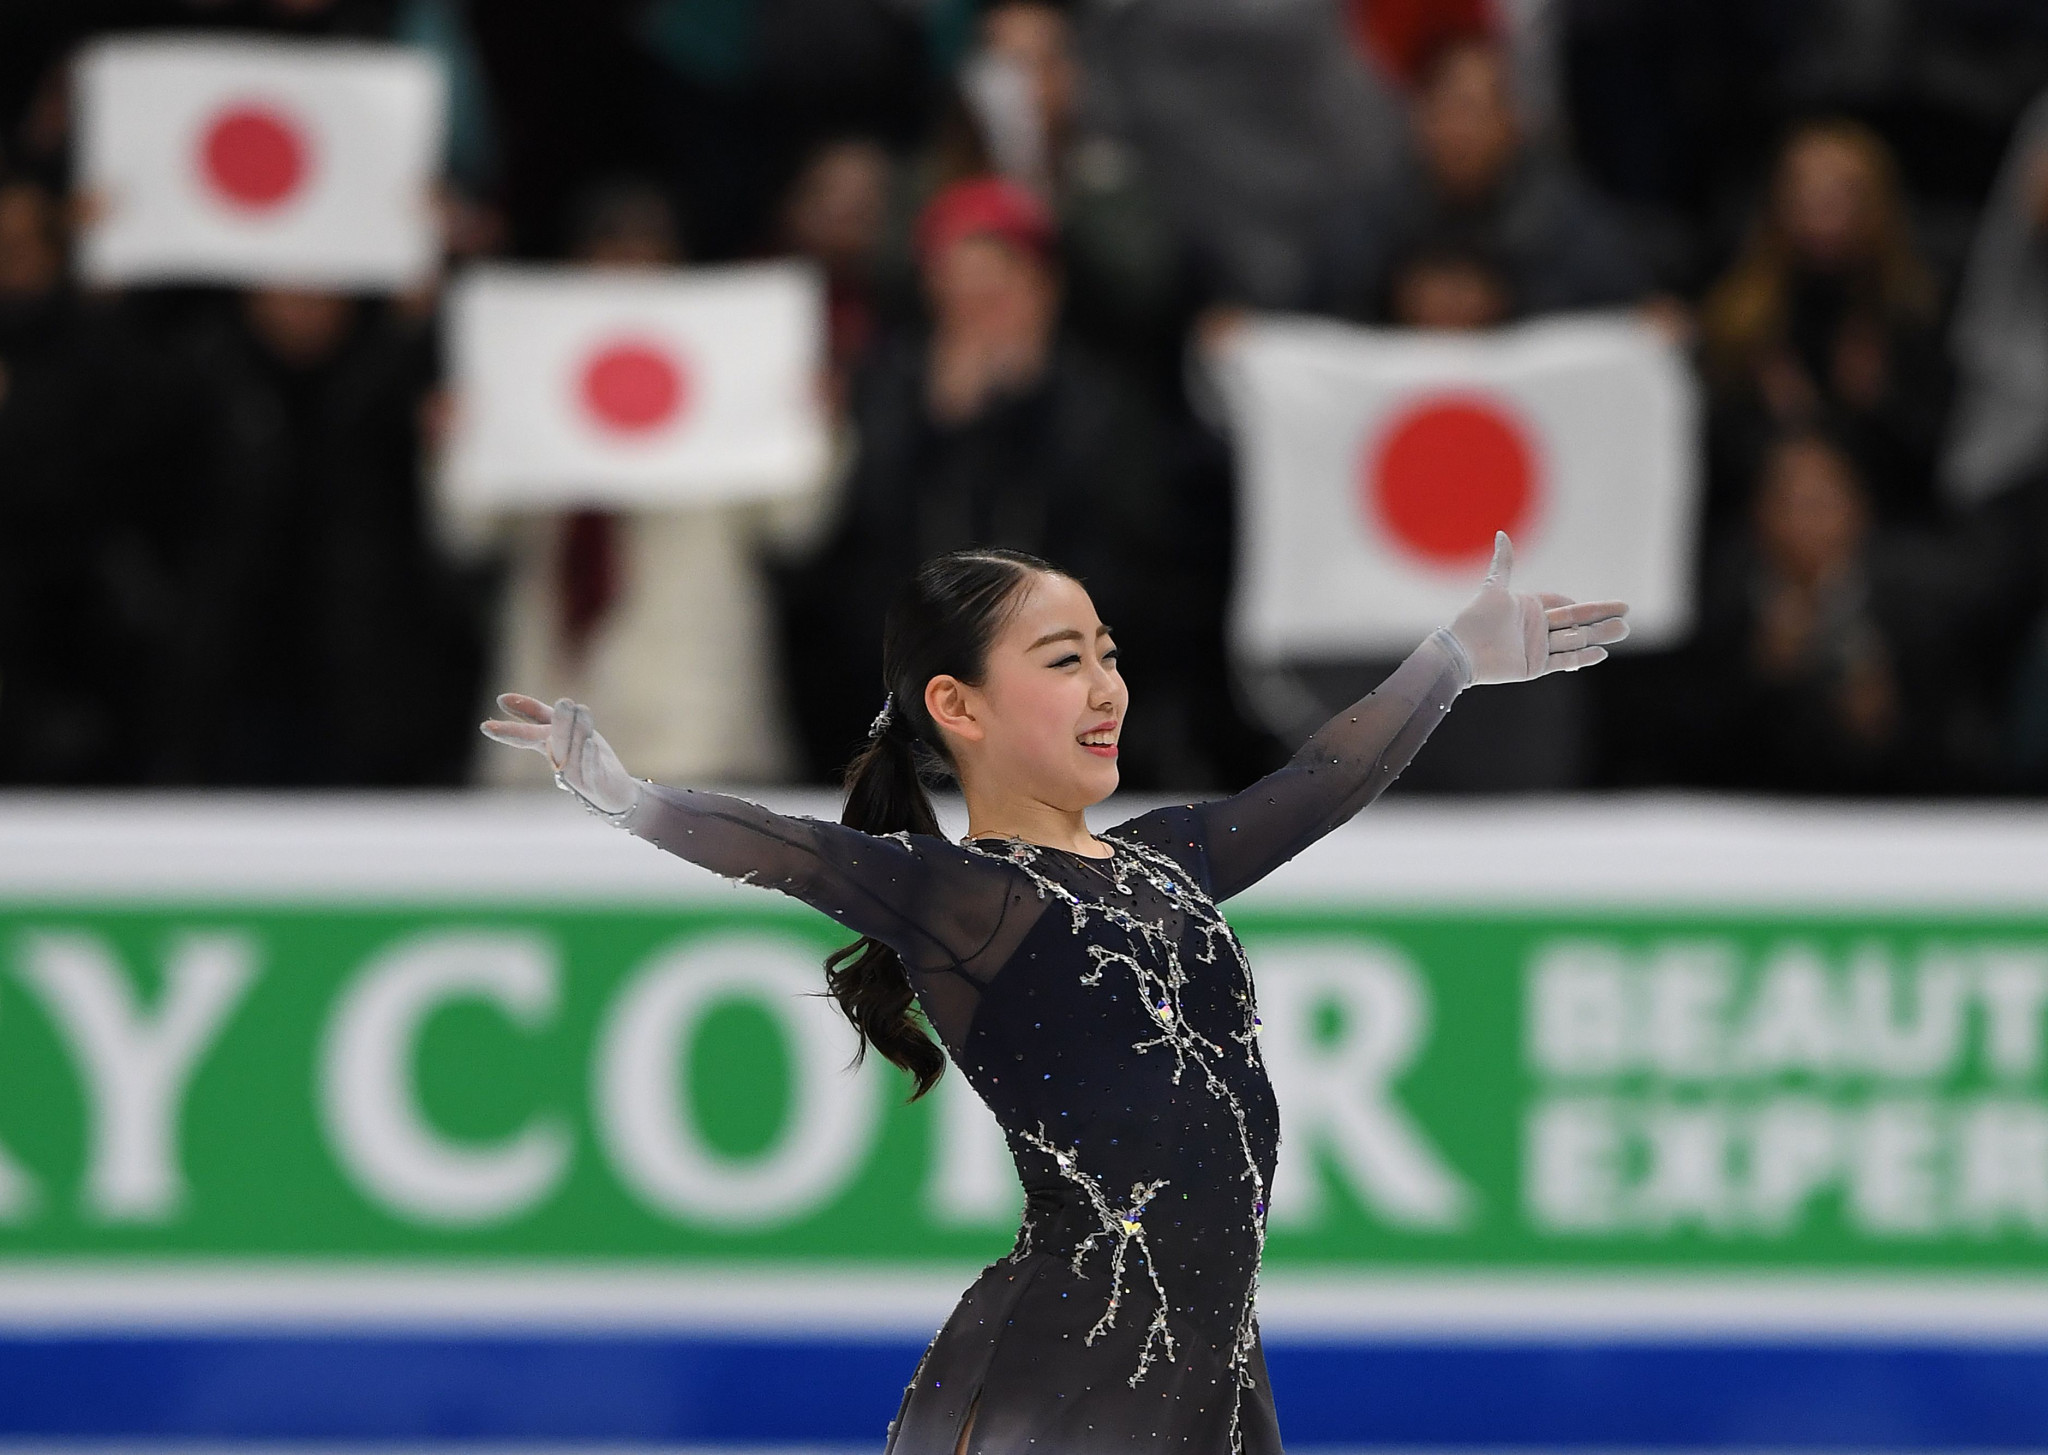 Japan are defending champions at the ISU World Team Trophy ©Getty Images